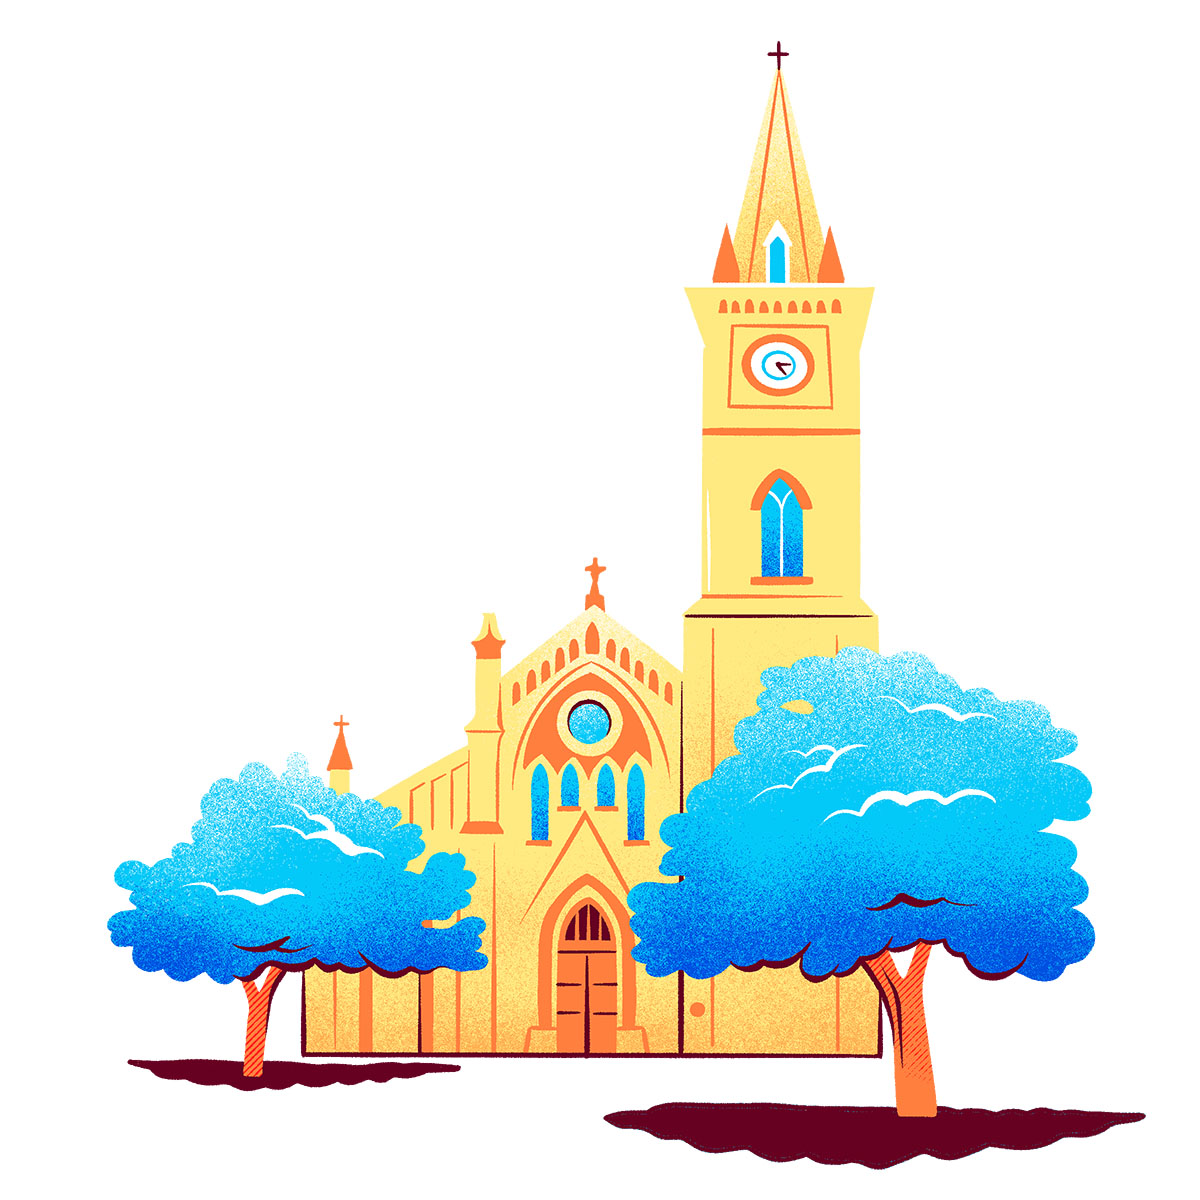 An illustration of a tall golden cathedral